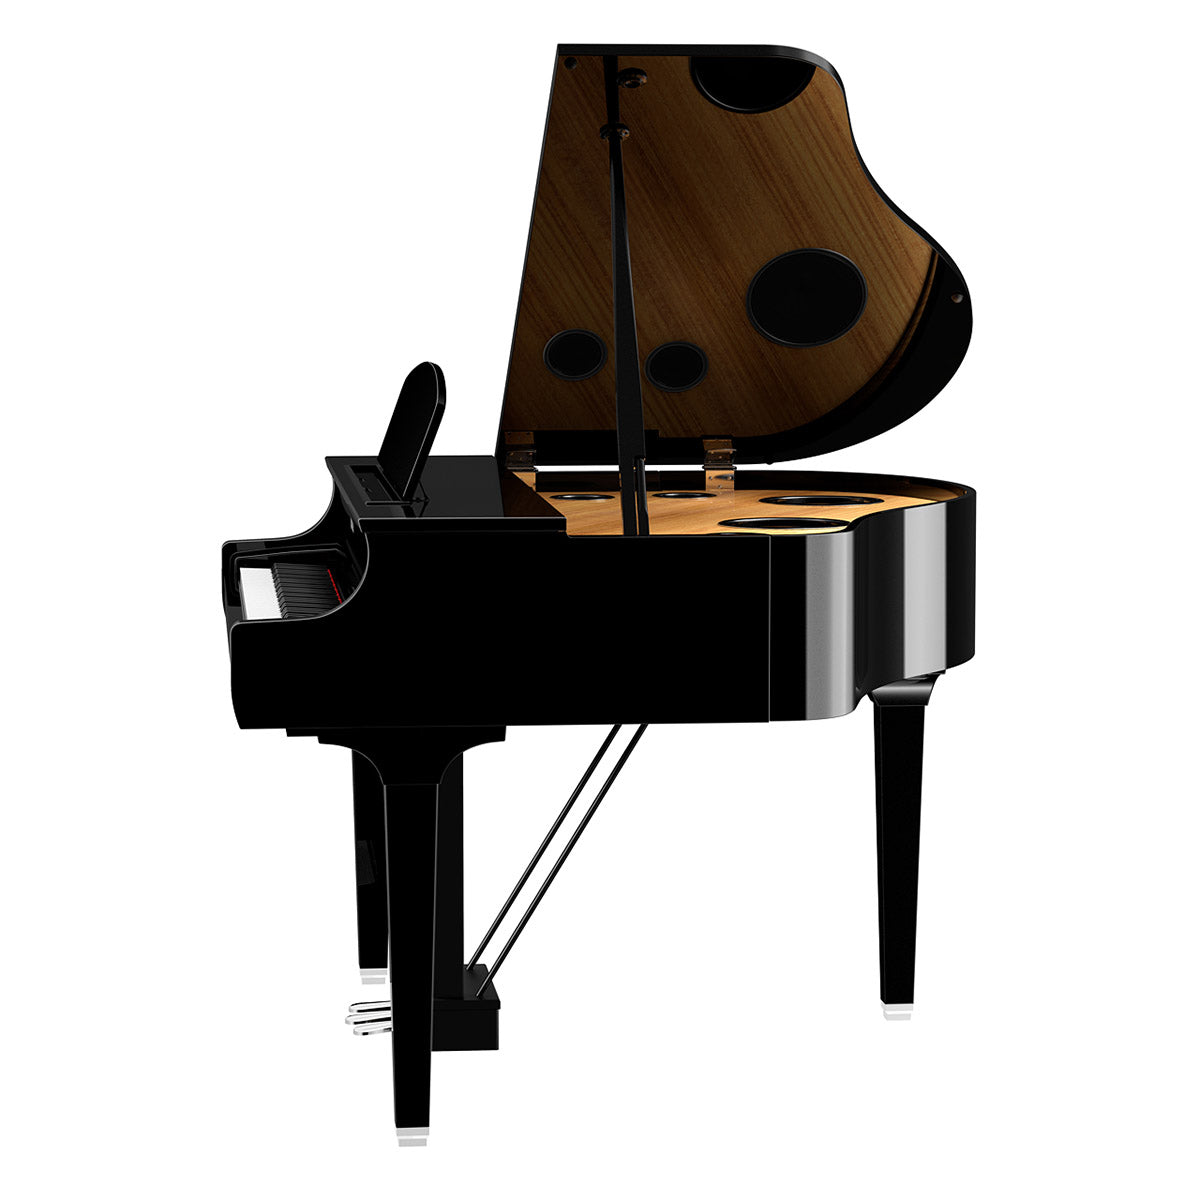 Perspective view of Yamaha Clavinova CLP-795GP Digital Piano - Polished Ebony showing right side and top